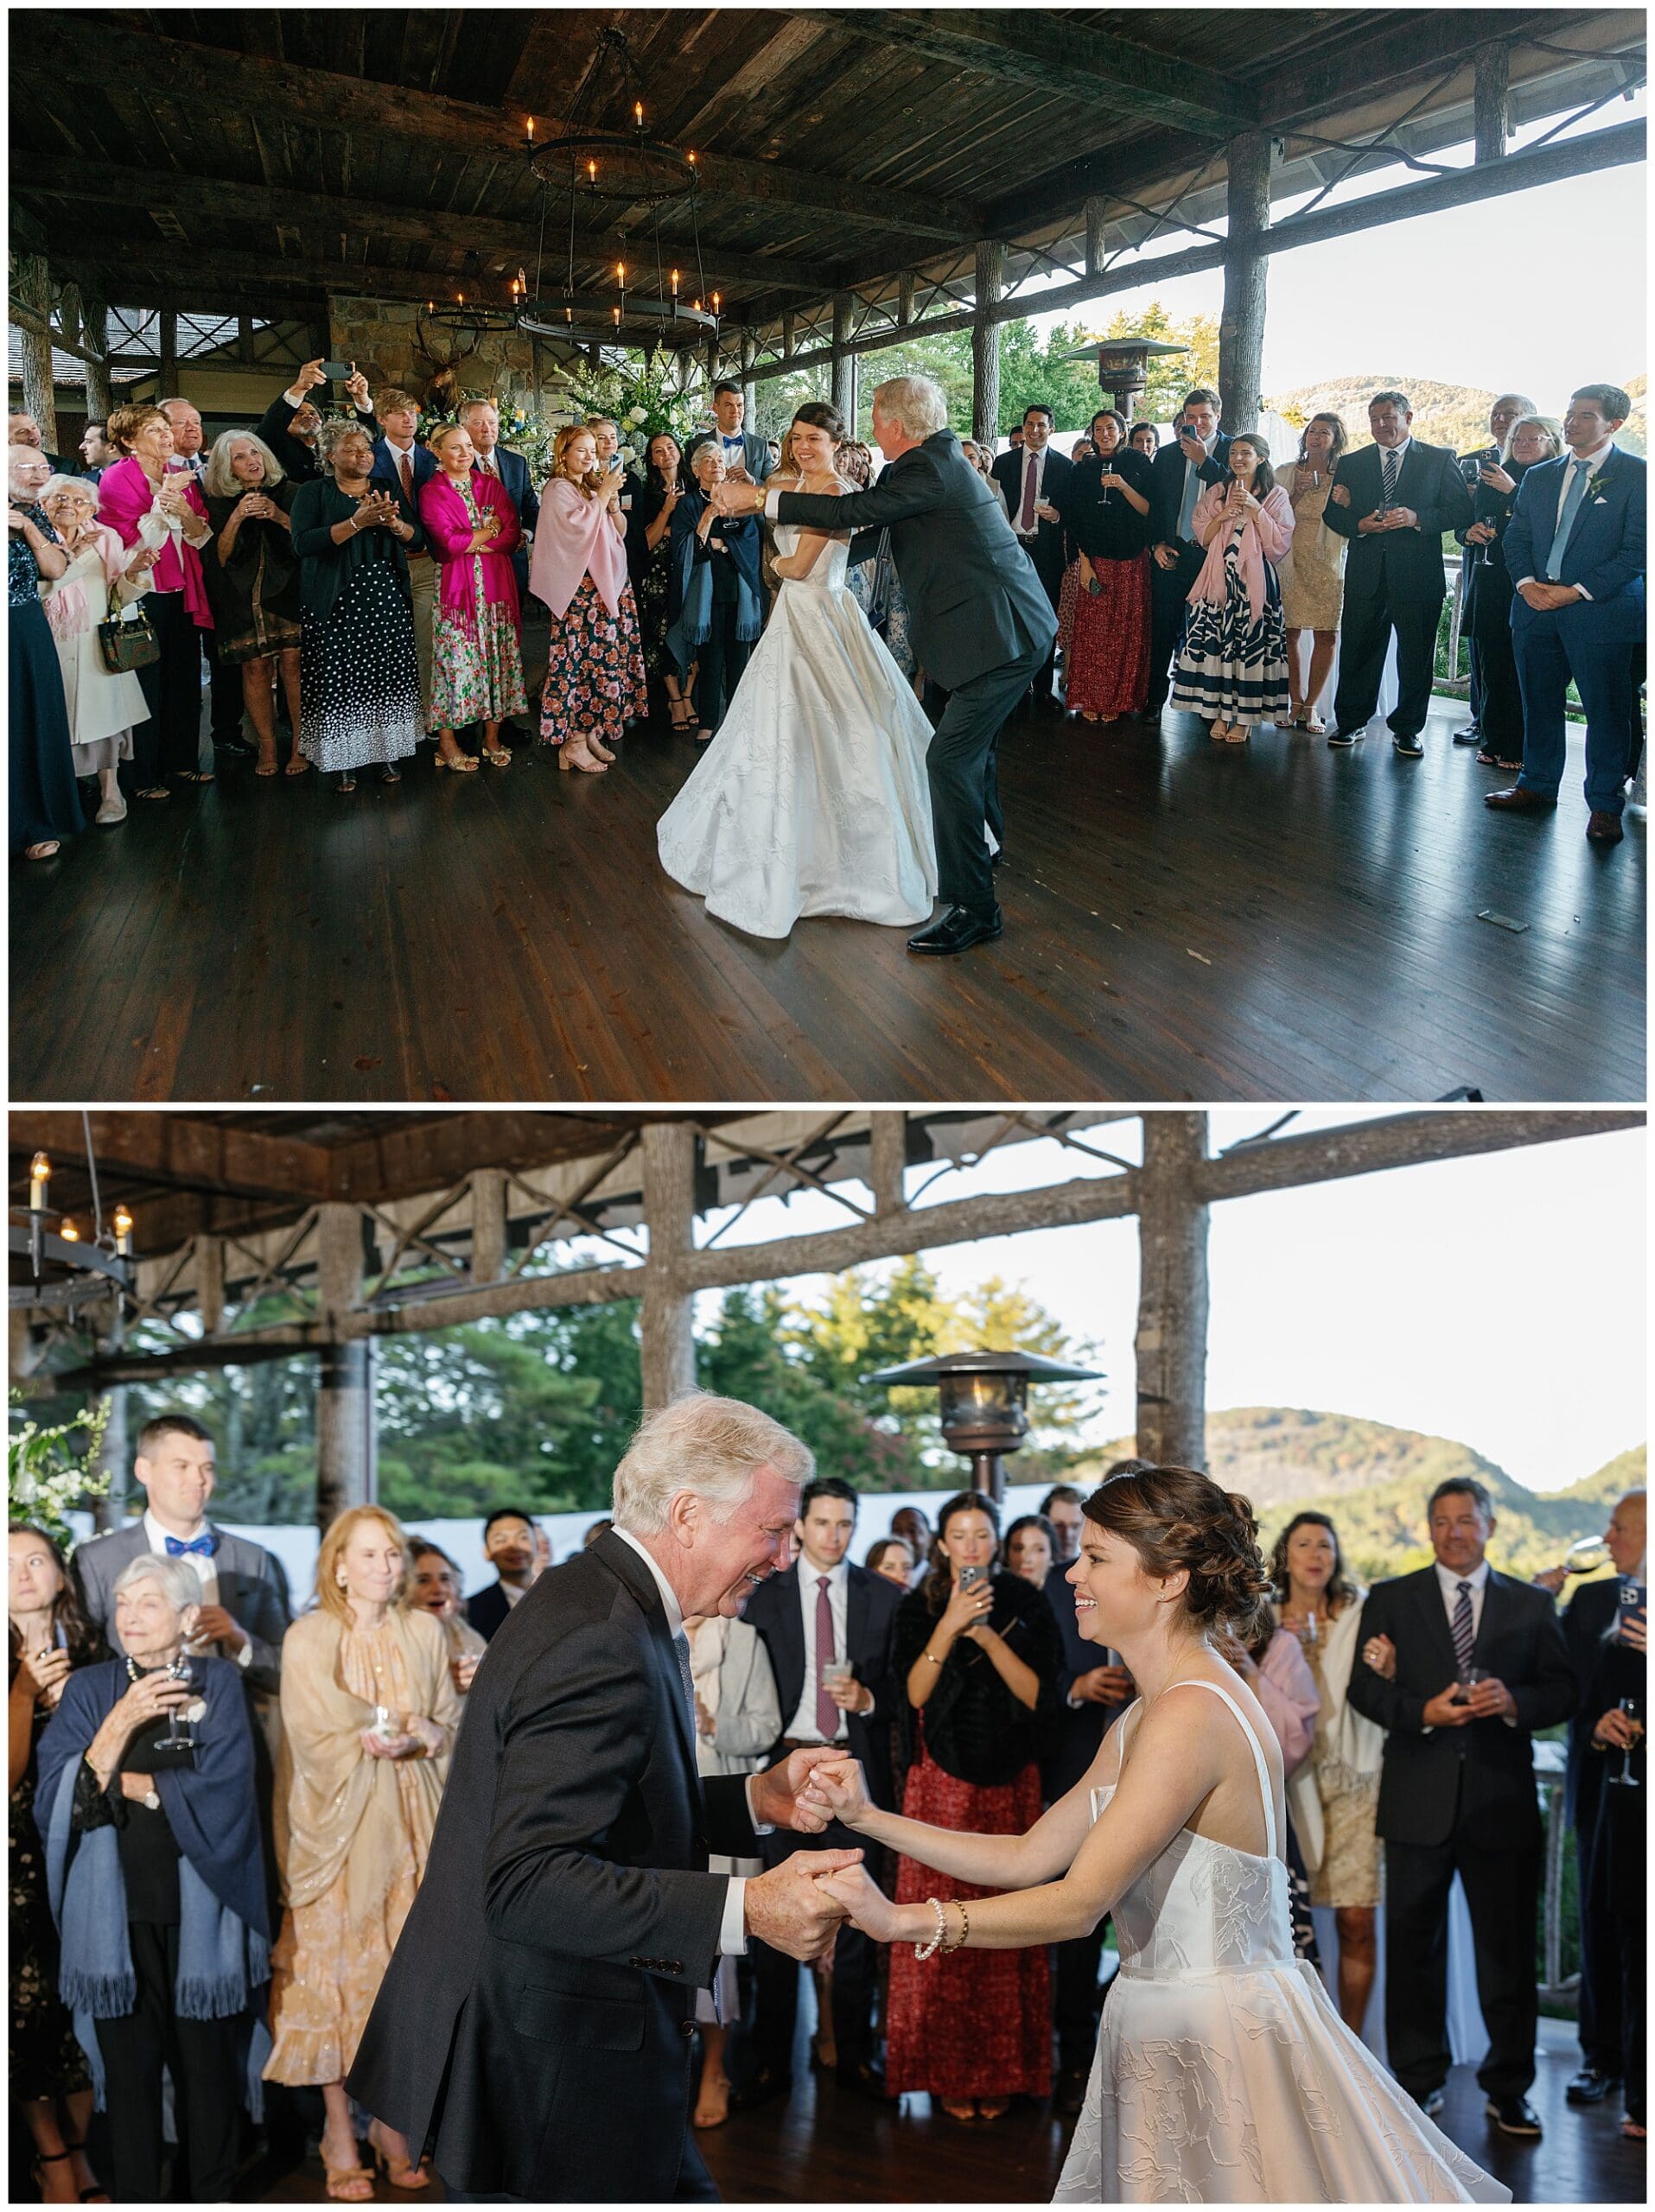 A bride and groom share their first dance at a barn wedding.